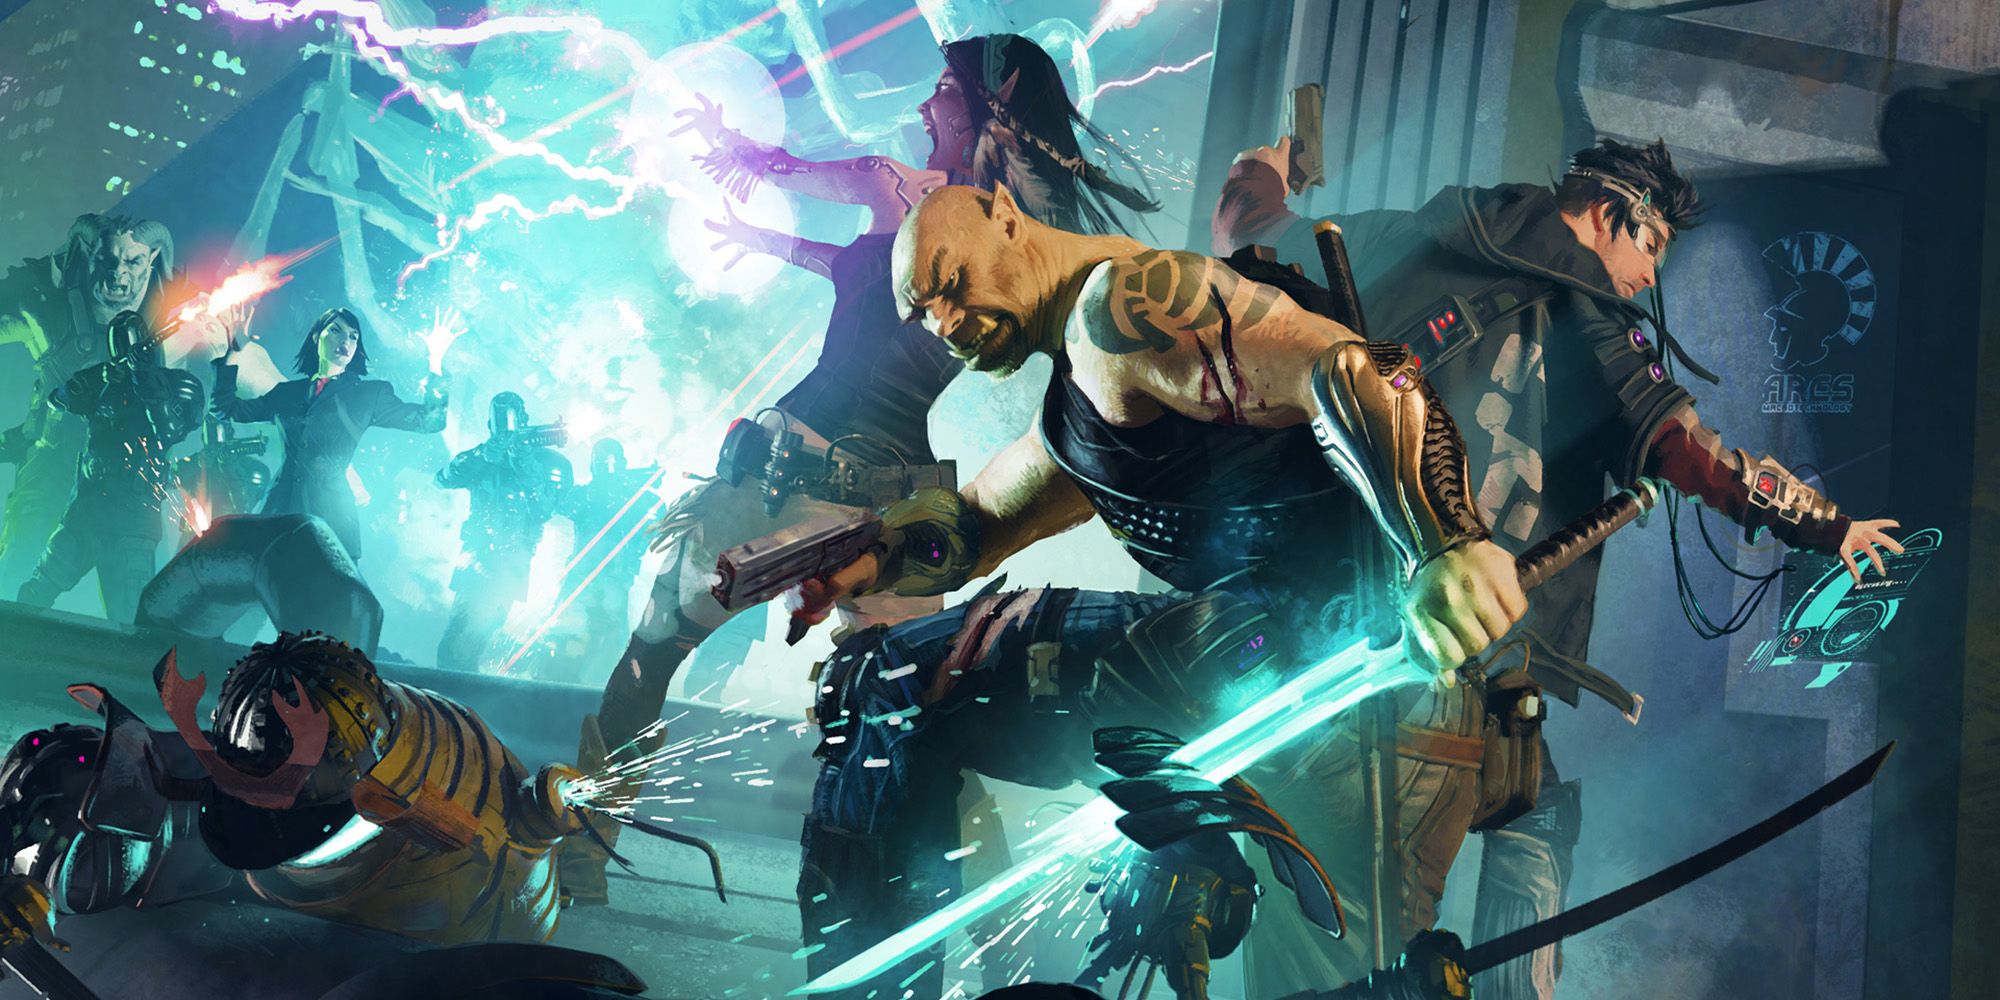 A group of characters from shadowrun battle in the street with swords, guns, and magic